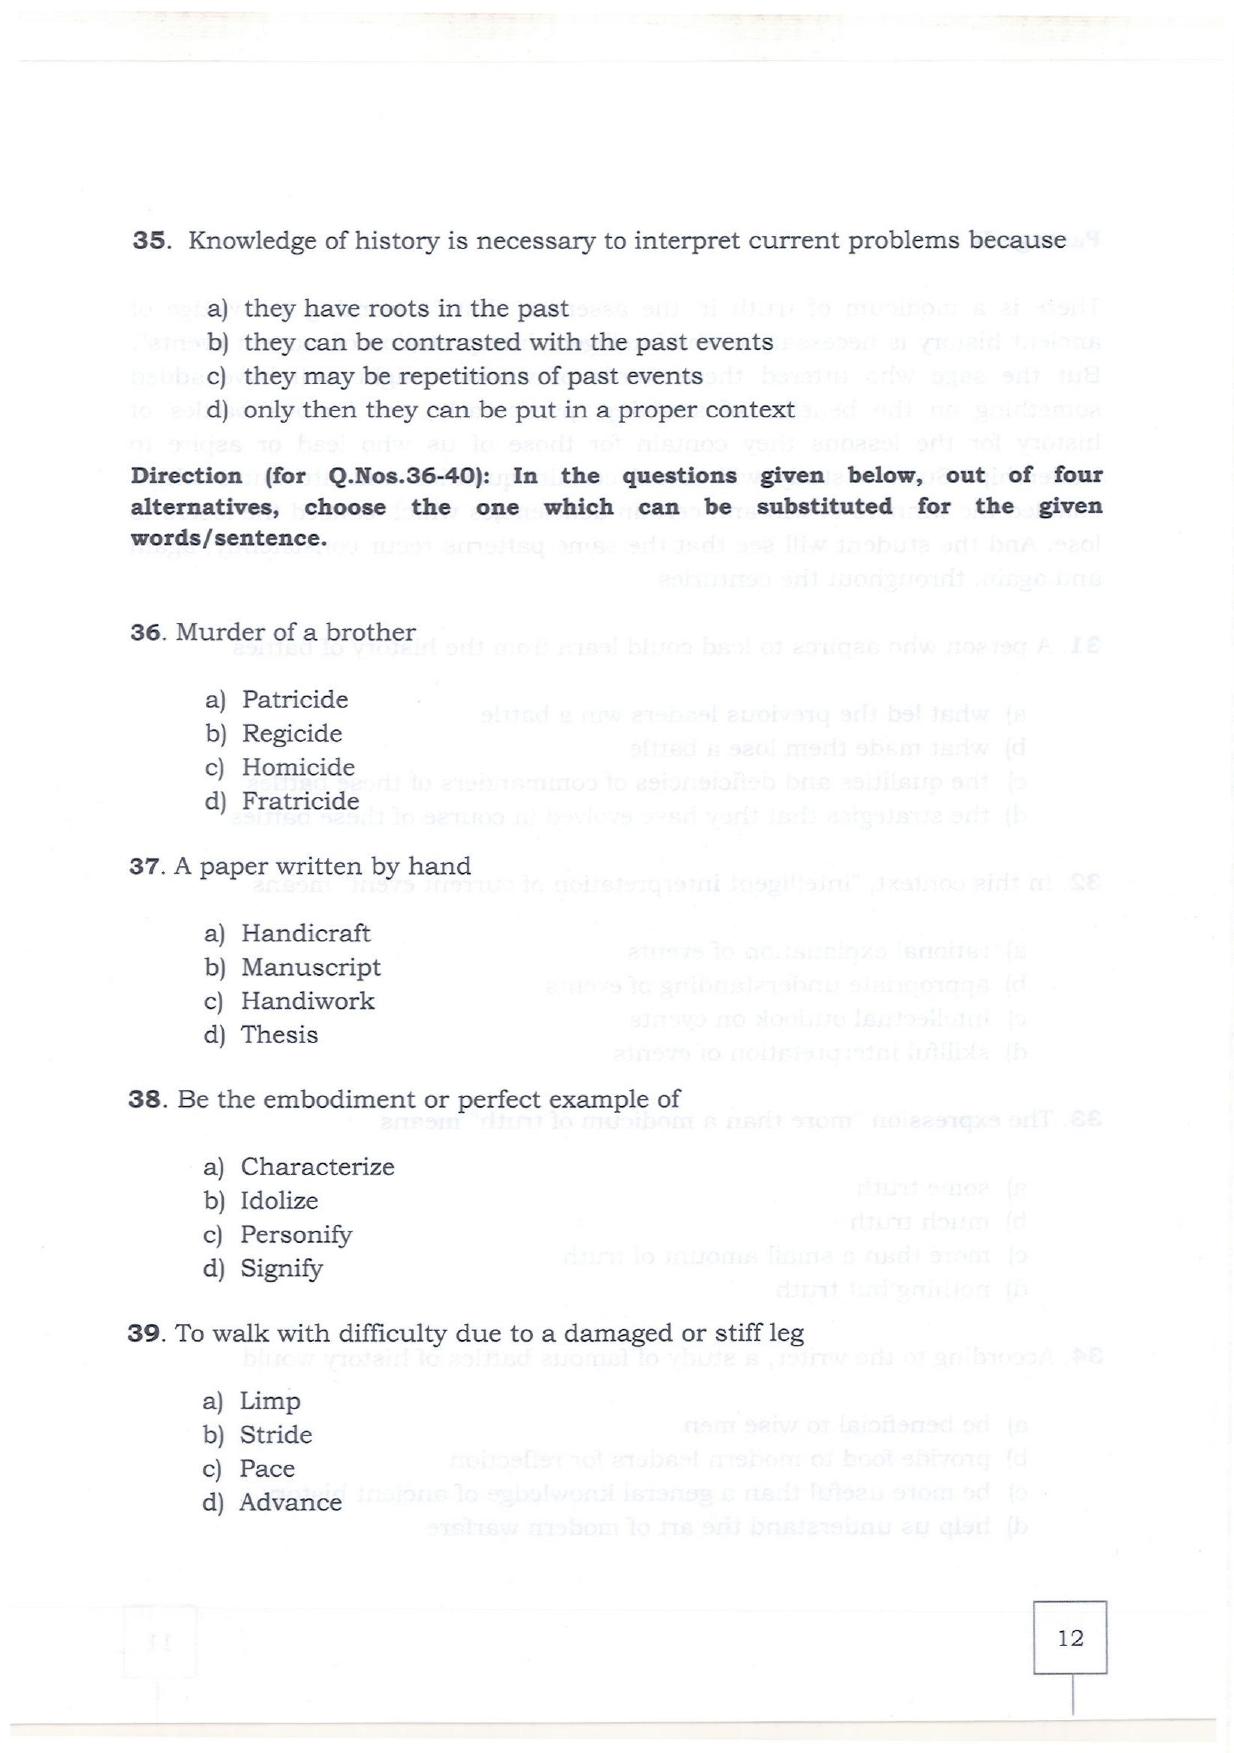 KMAT Question Papers - February 2019 - Page 10